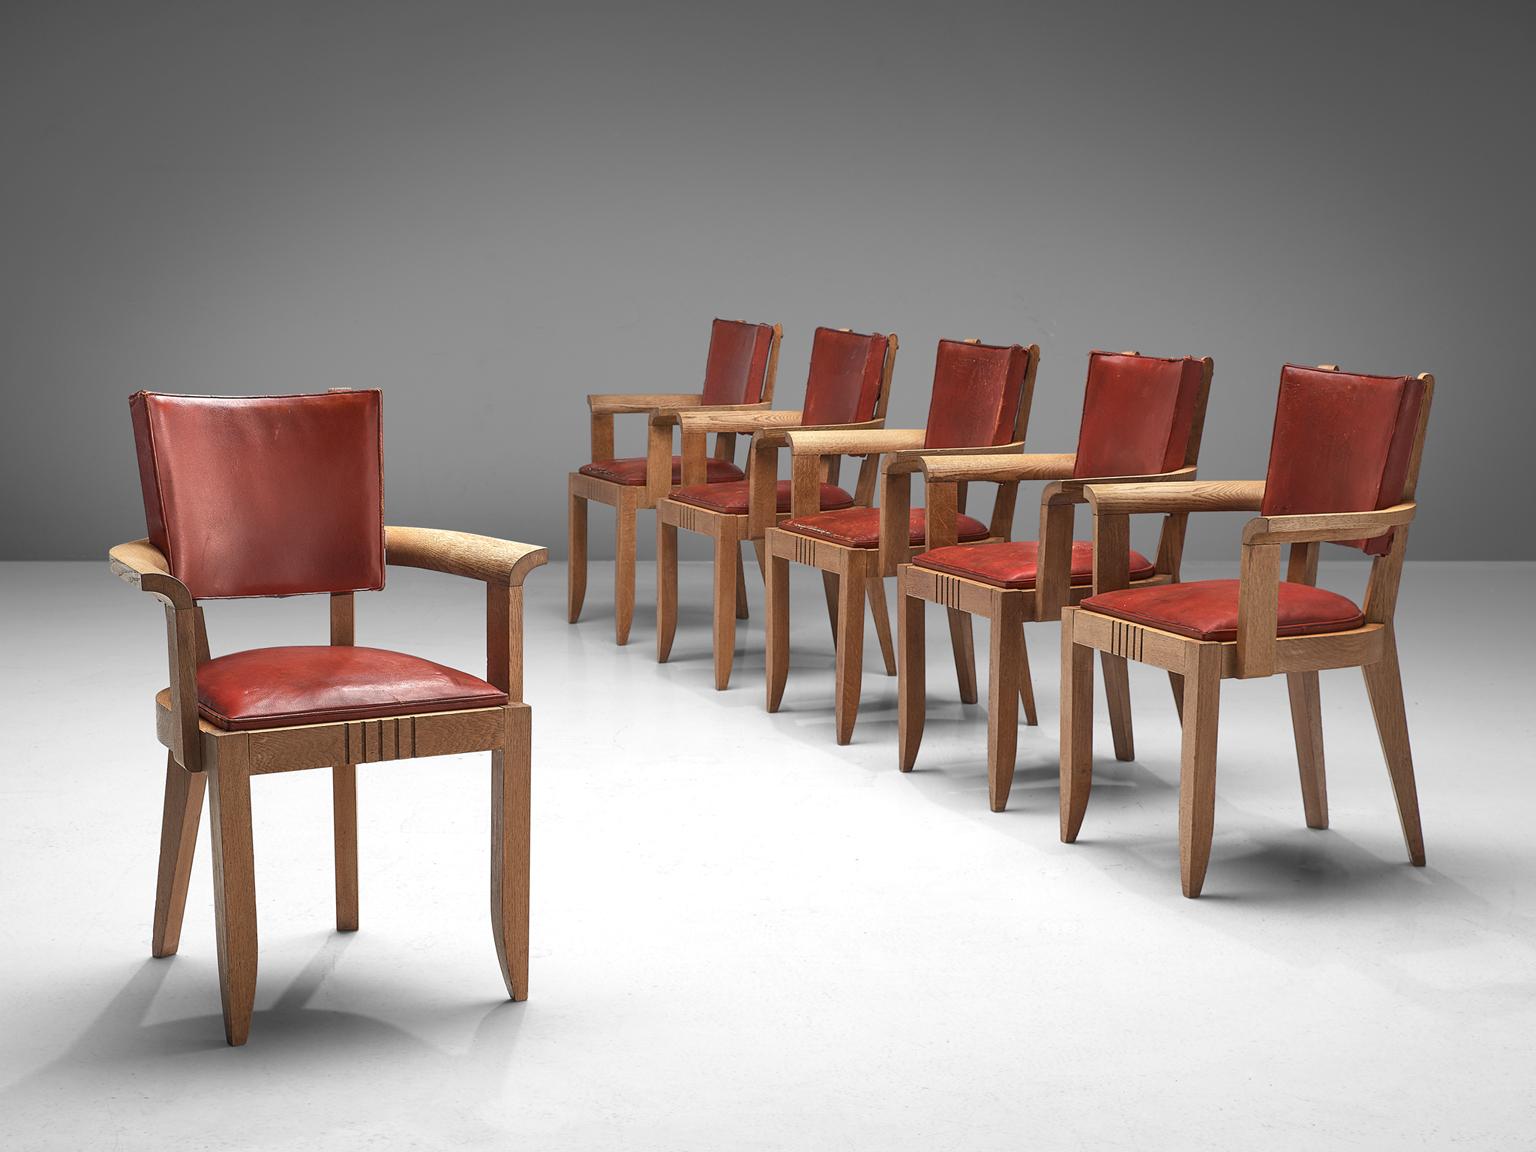 Charles Dudouyt, set of 6 armchairs, leather and oak, France, 1930s

This set of six Art Deco dining chairs is upholstered with deep red leather that has patinated over time. The frame is made of solid oak and features tapered, carved legs. The